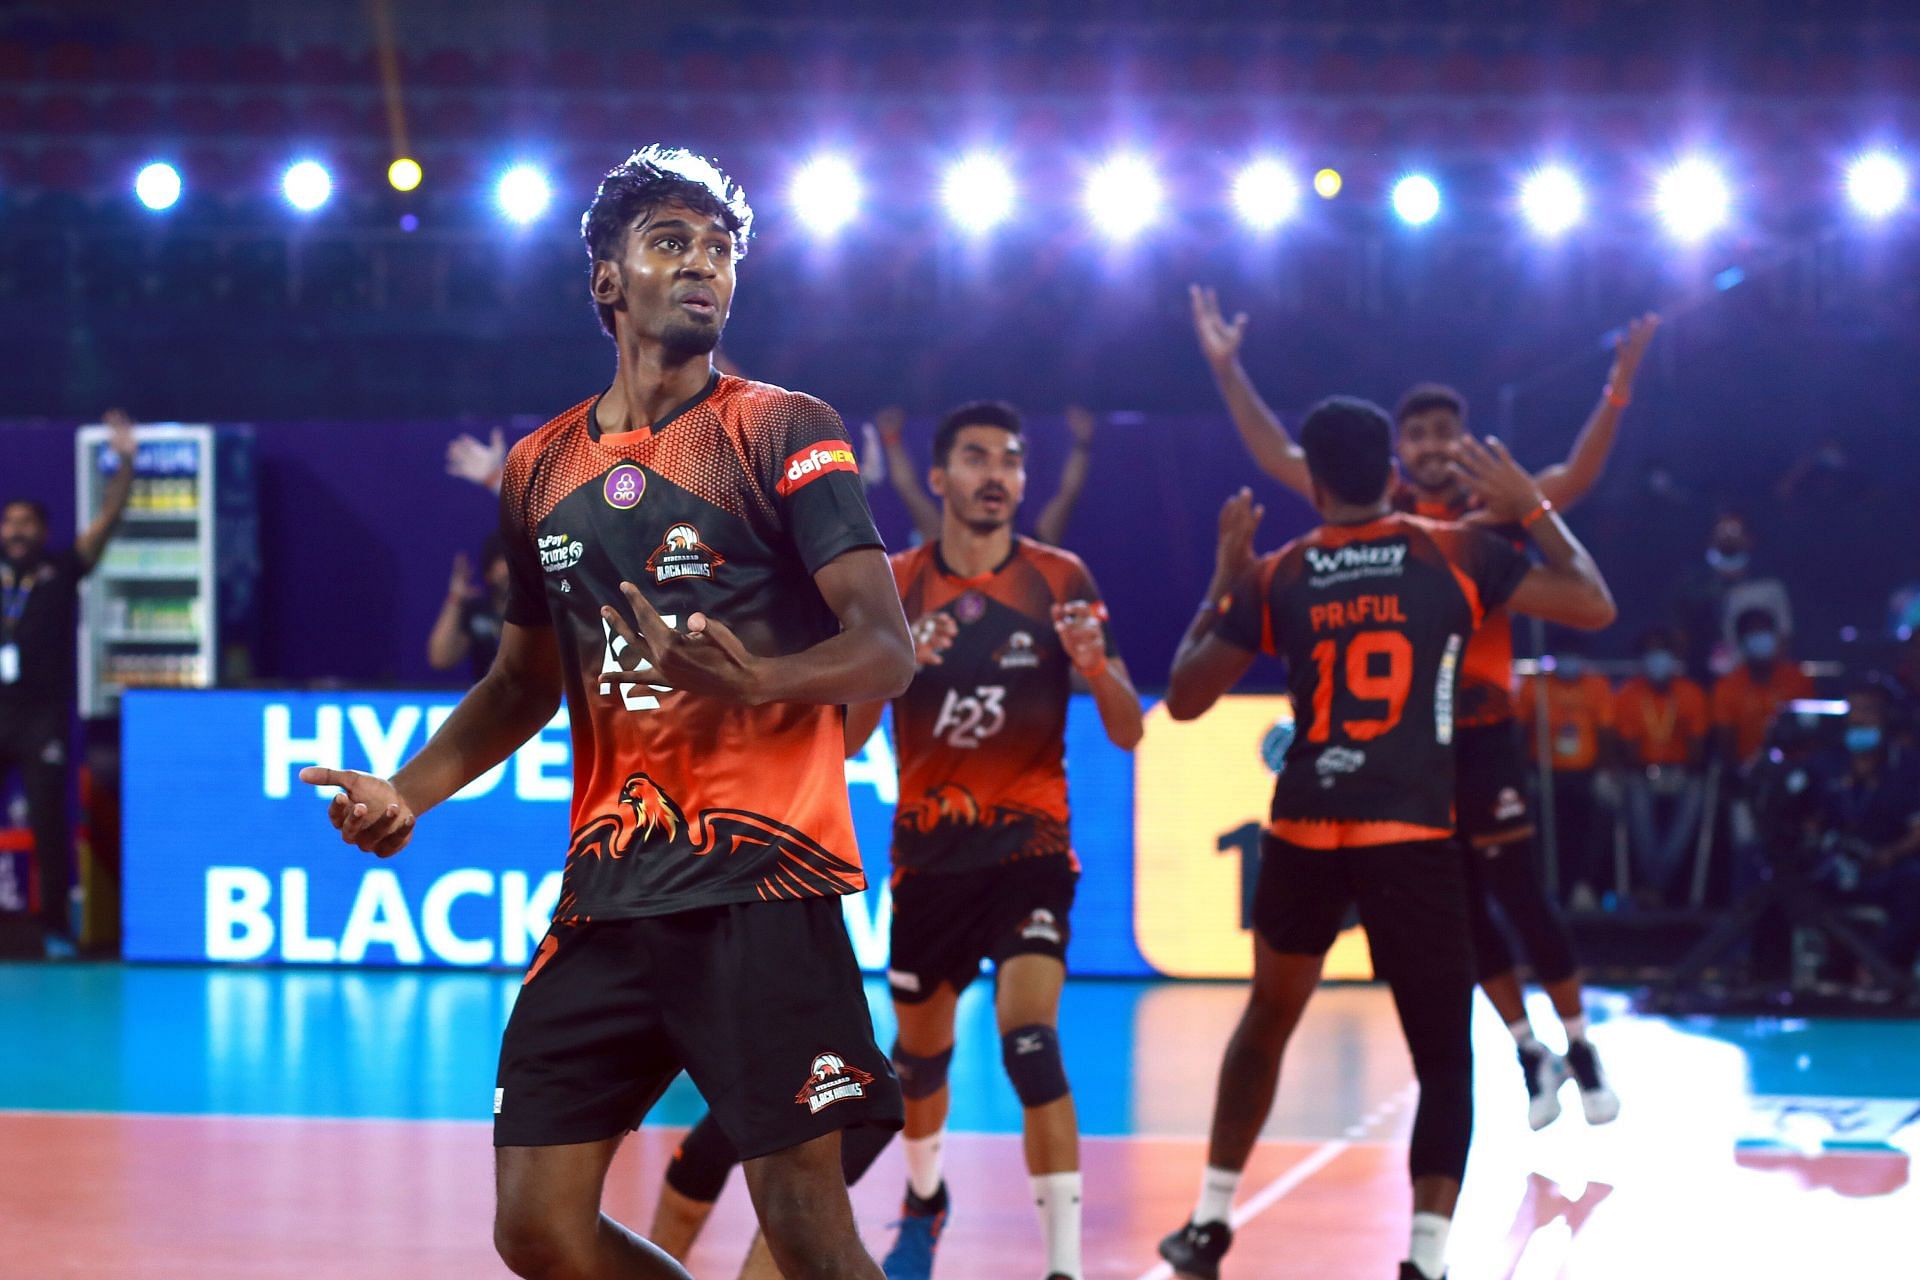 Prime Volleyball League a learning curve for Guru Prasanth